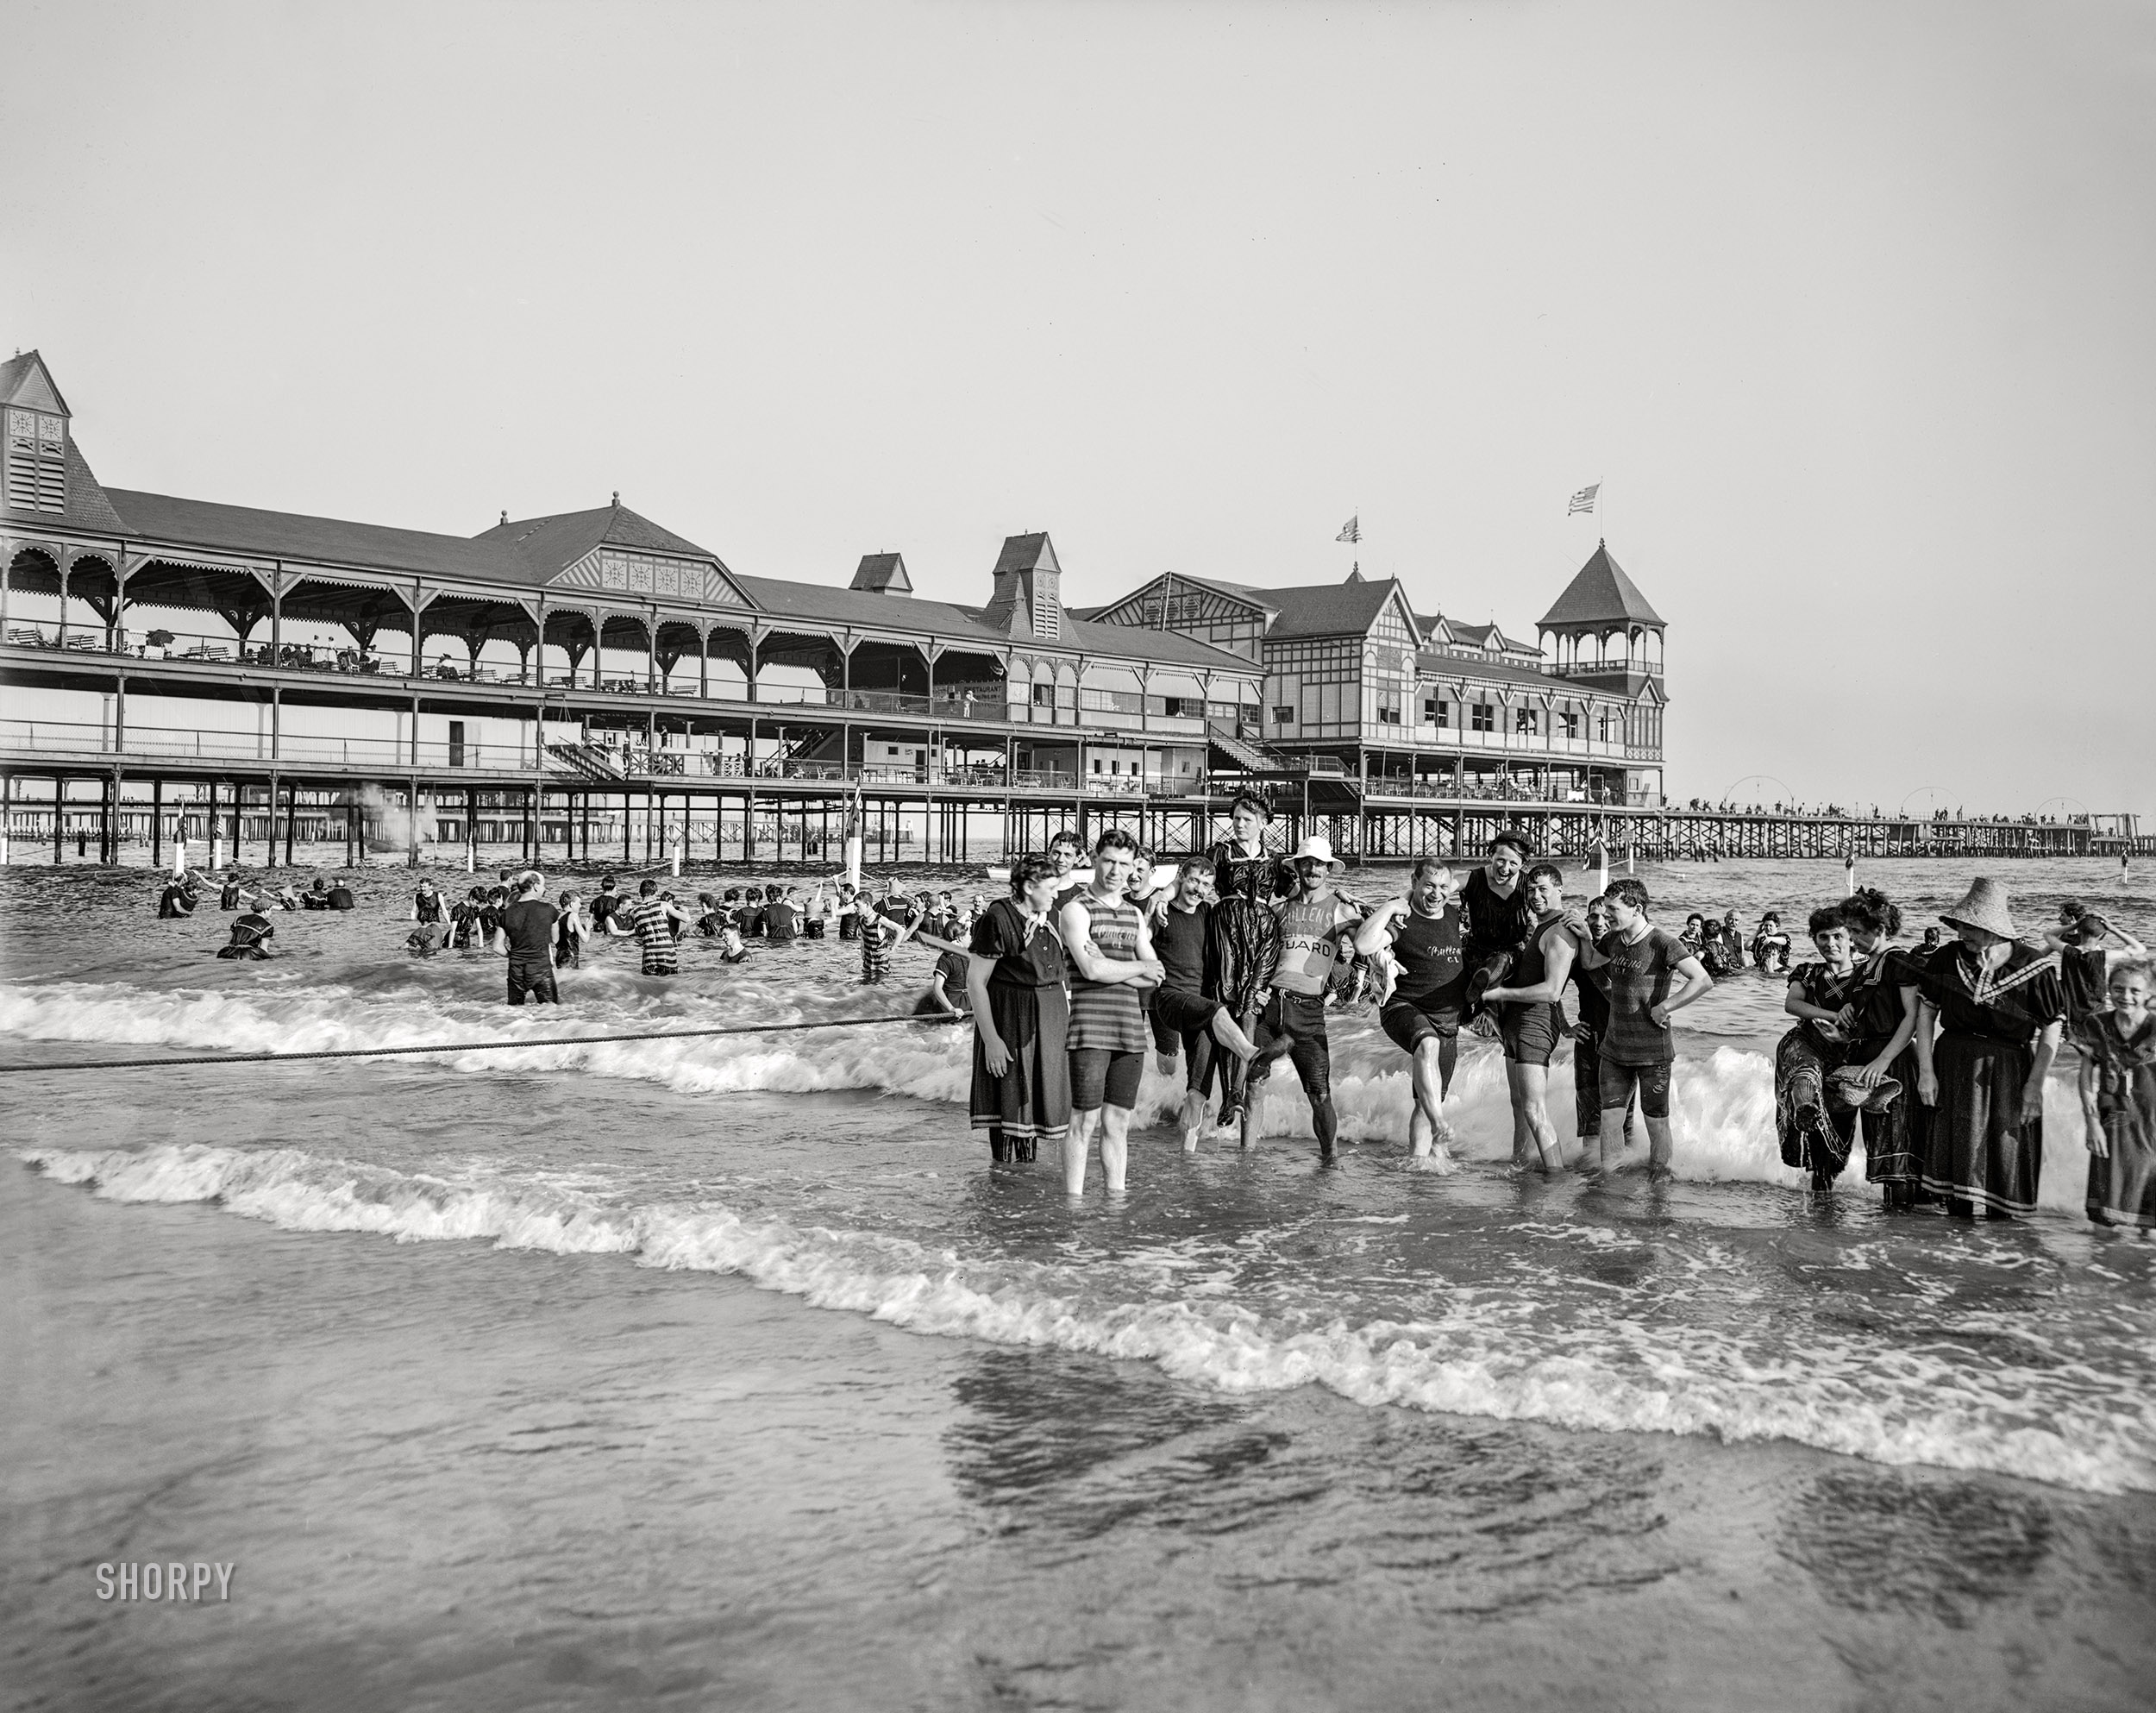 1903. "Bathers and the Iron Pier -- West Brighton Beach, Coney Island, N.Y." 8x10 inch dry plate glass negative, Detroit Photographic Company. View full size.